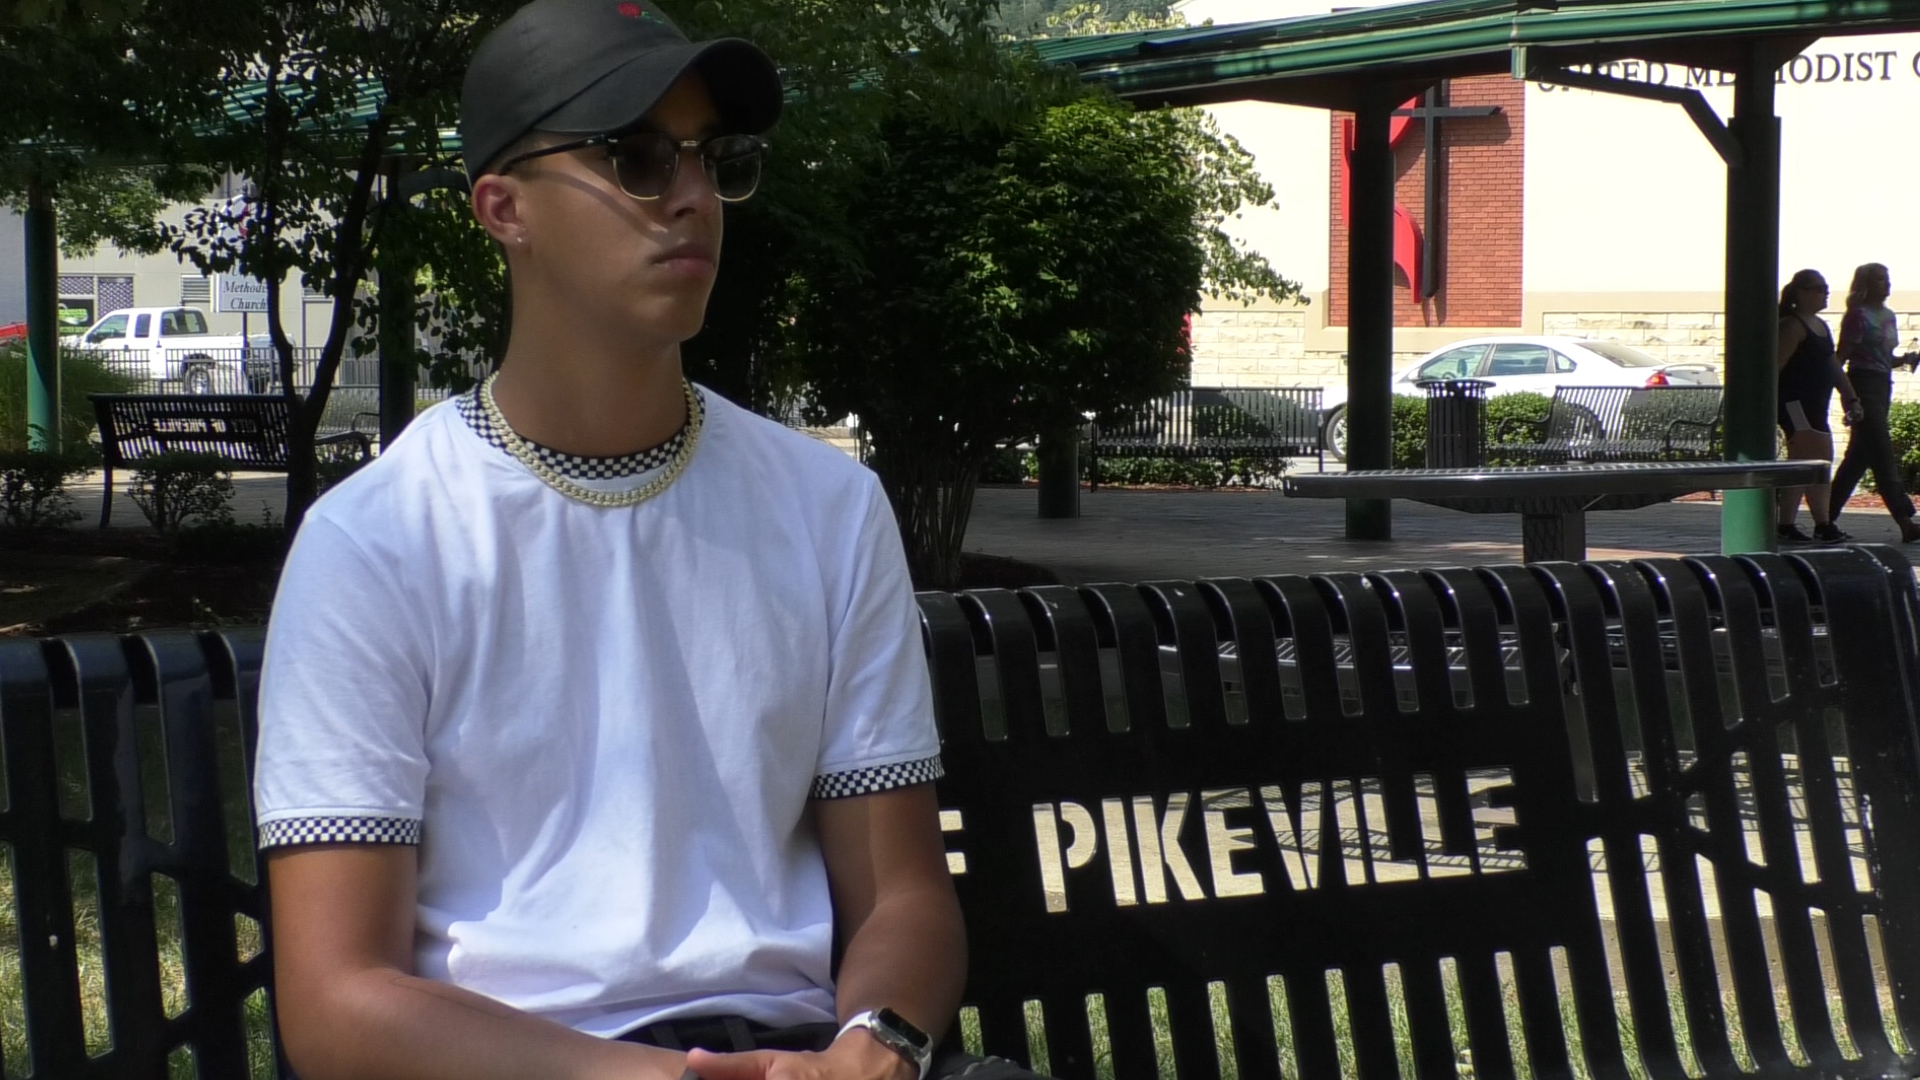 “No one stood up for me”, UPIKE student recalls racist incident